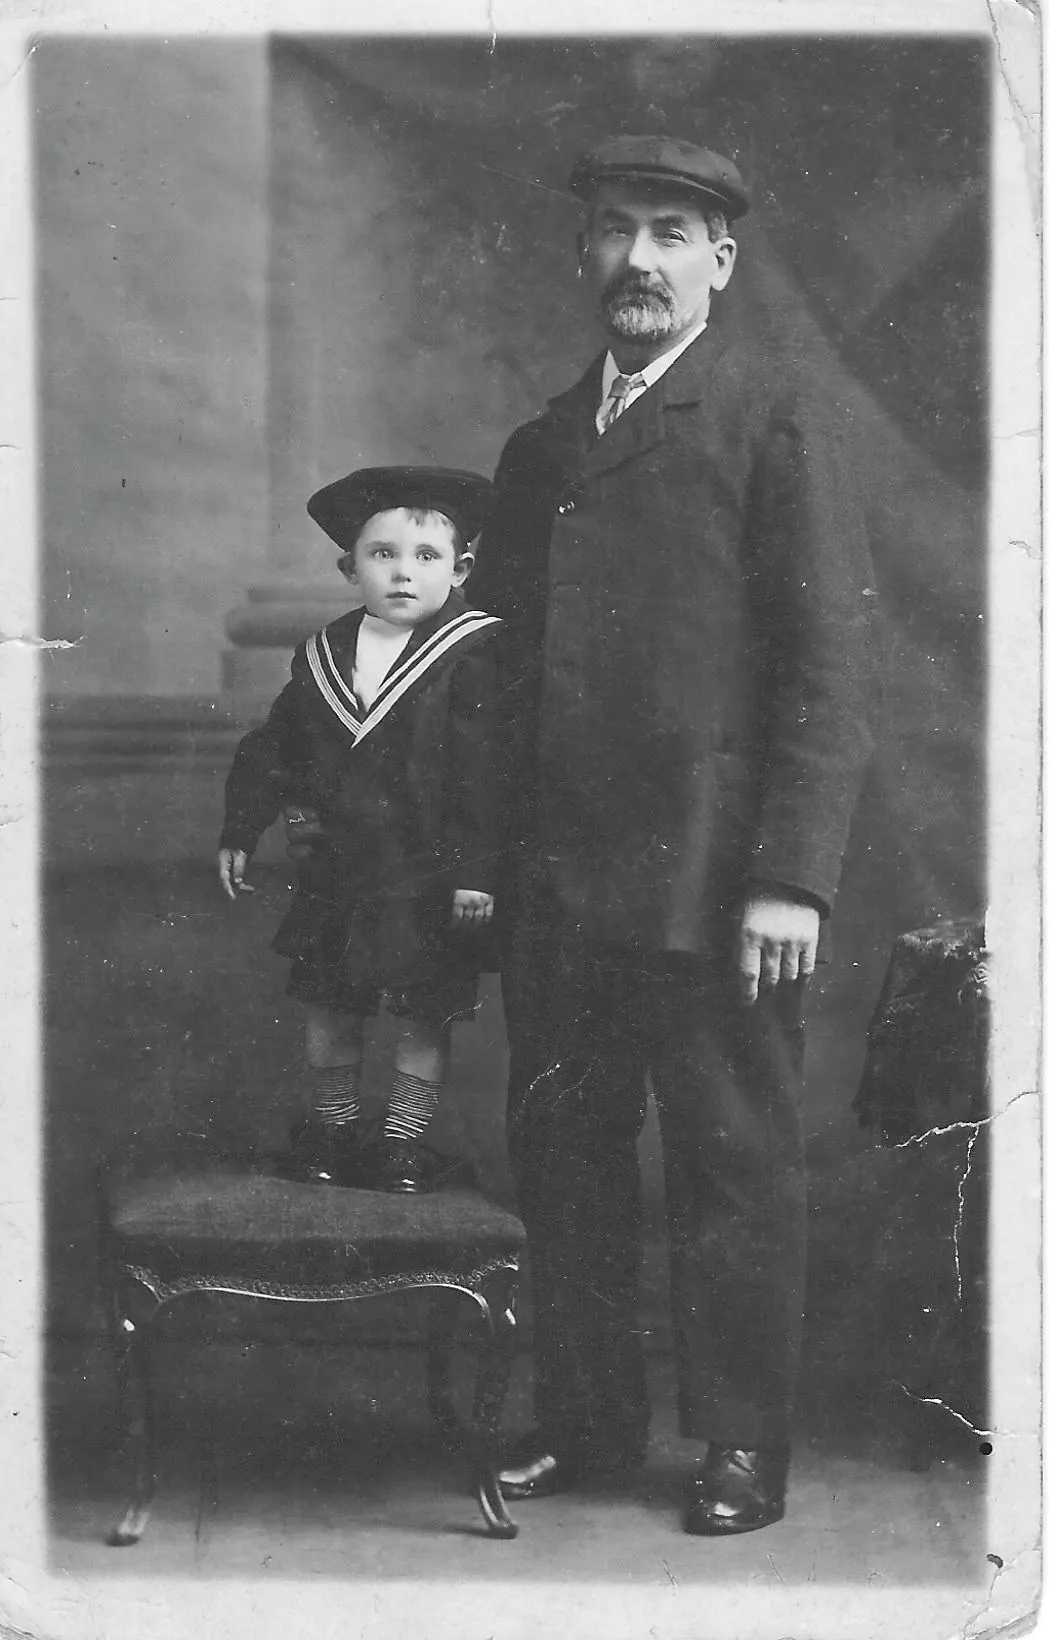 Black and white photograph of a man with a flat cap, moustache and beard and a little boy in a sailor suit